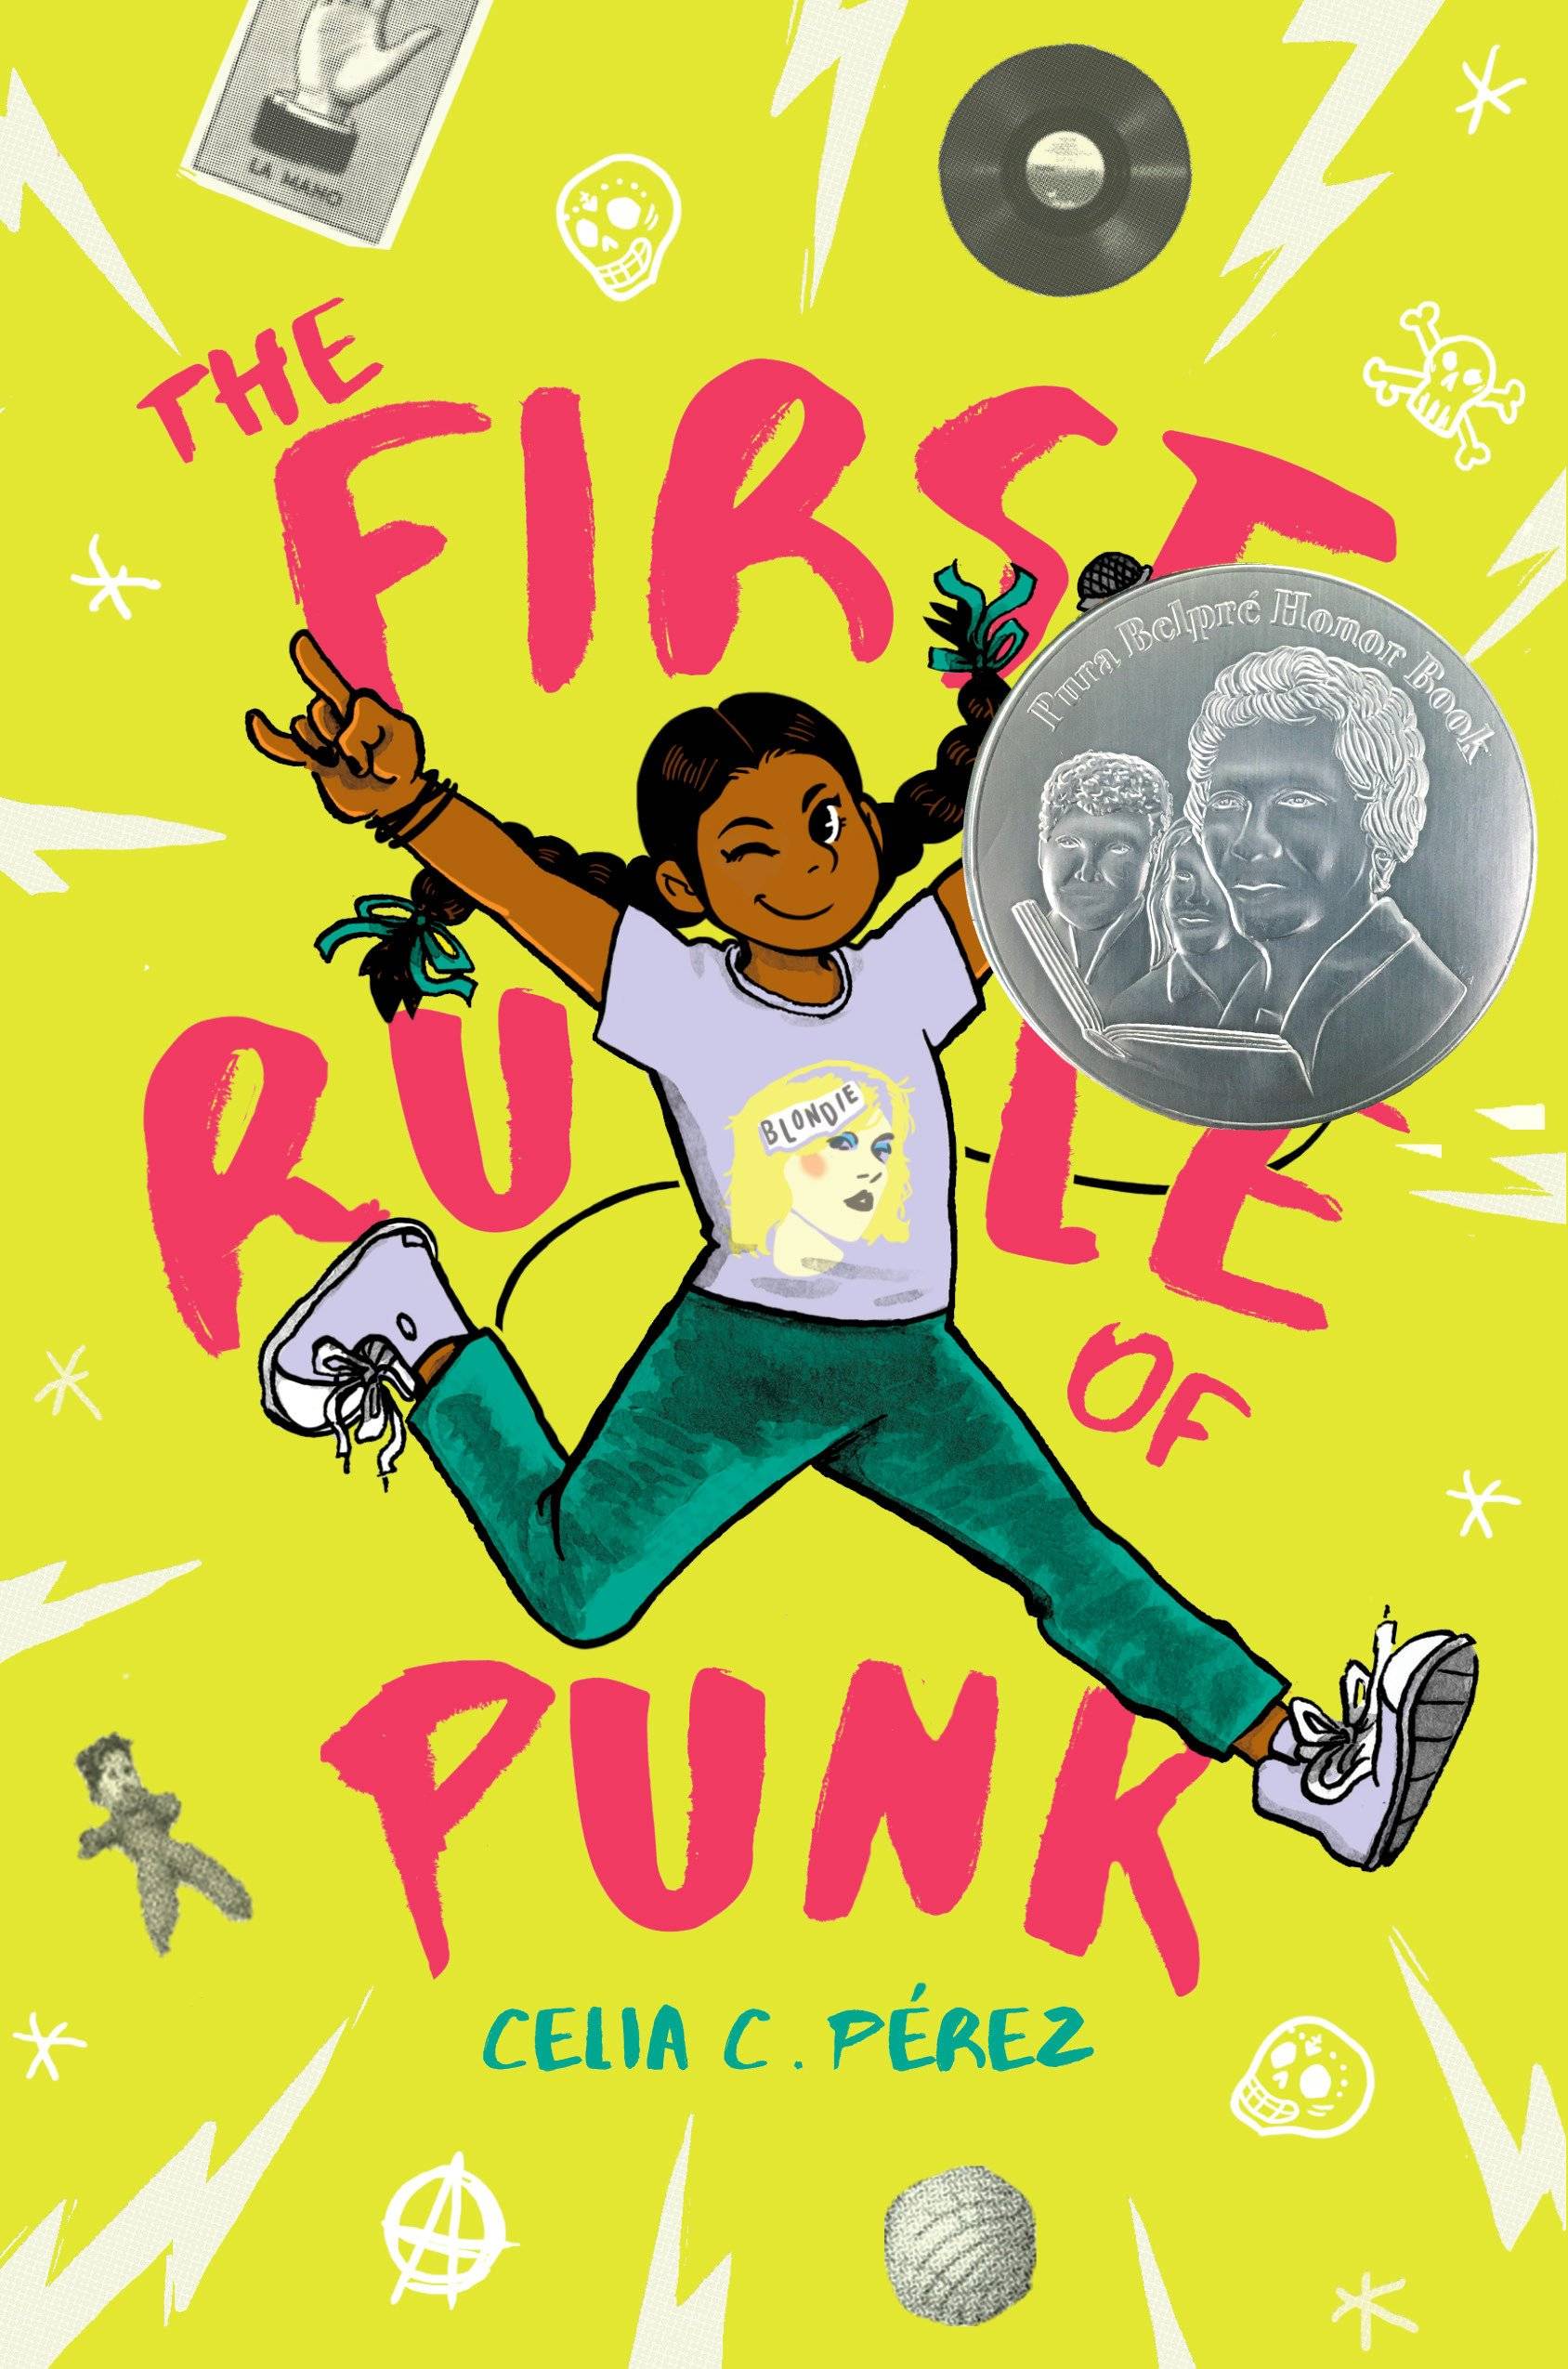 "the first rule of punk" cover featuring an illustration of a child with braided pigtails holding a microphone and giving the rock and roll hand symbol.